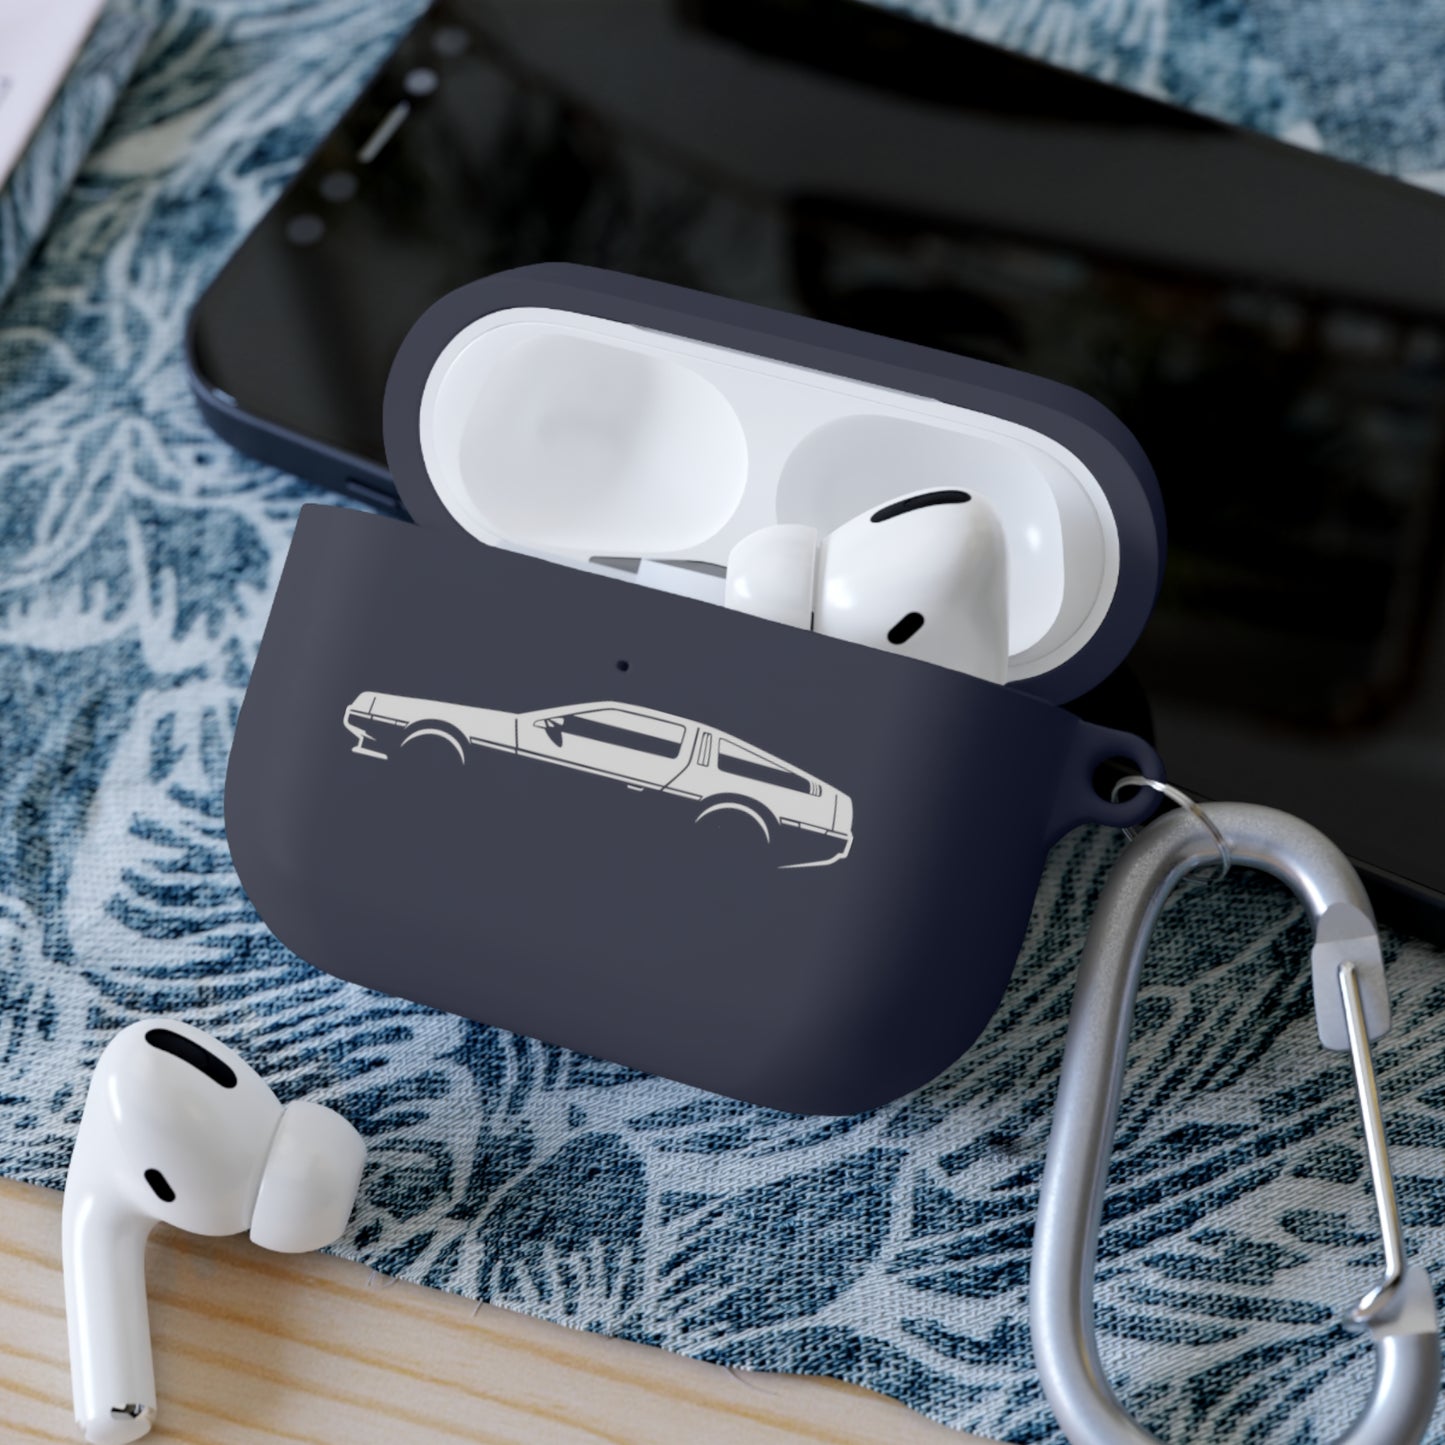 DeLorean: Premium AirPods Case with Iconic Silhouette for Style and Protection